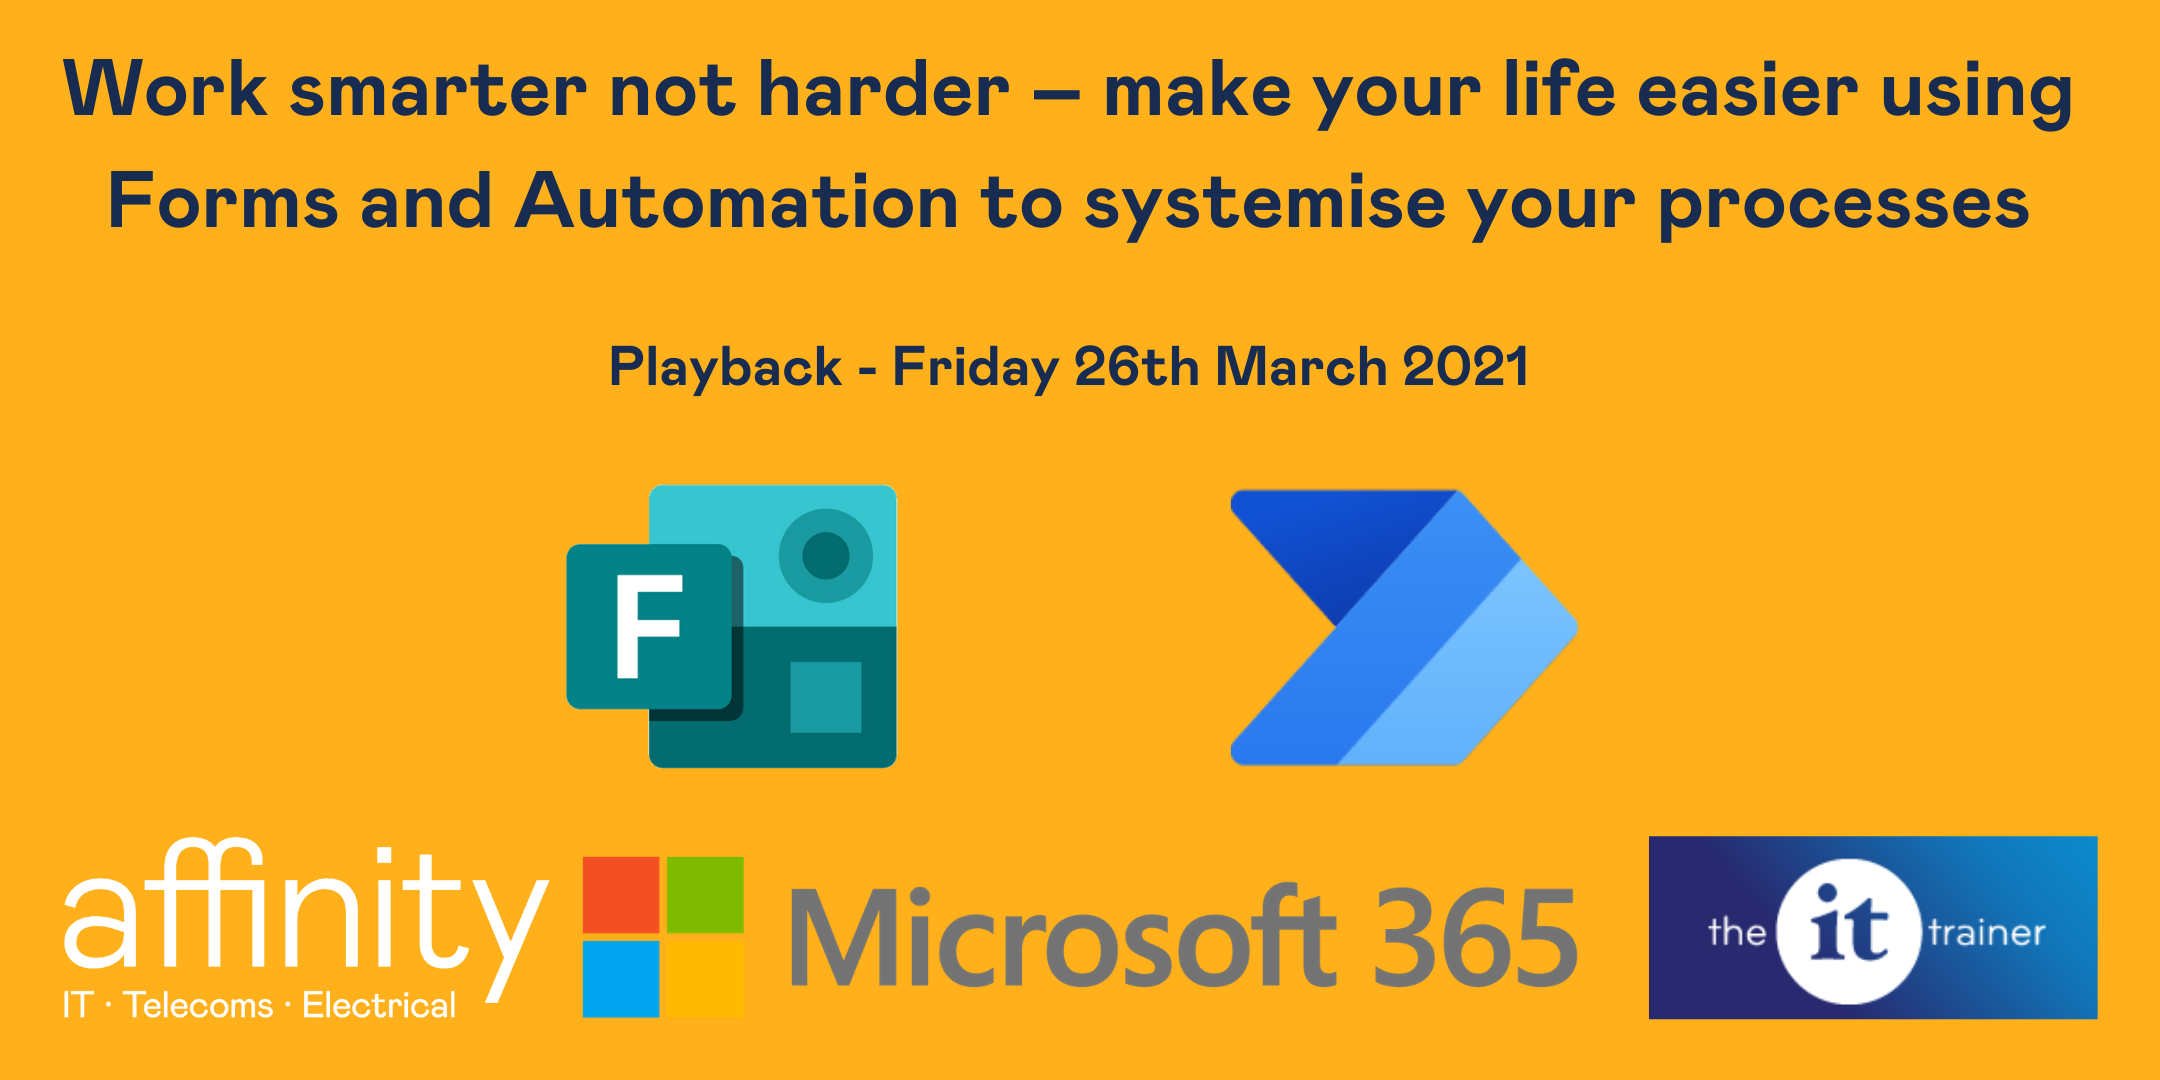 Work smarter not harder – make your life easier using Forms and Automation! logo